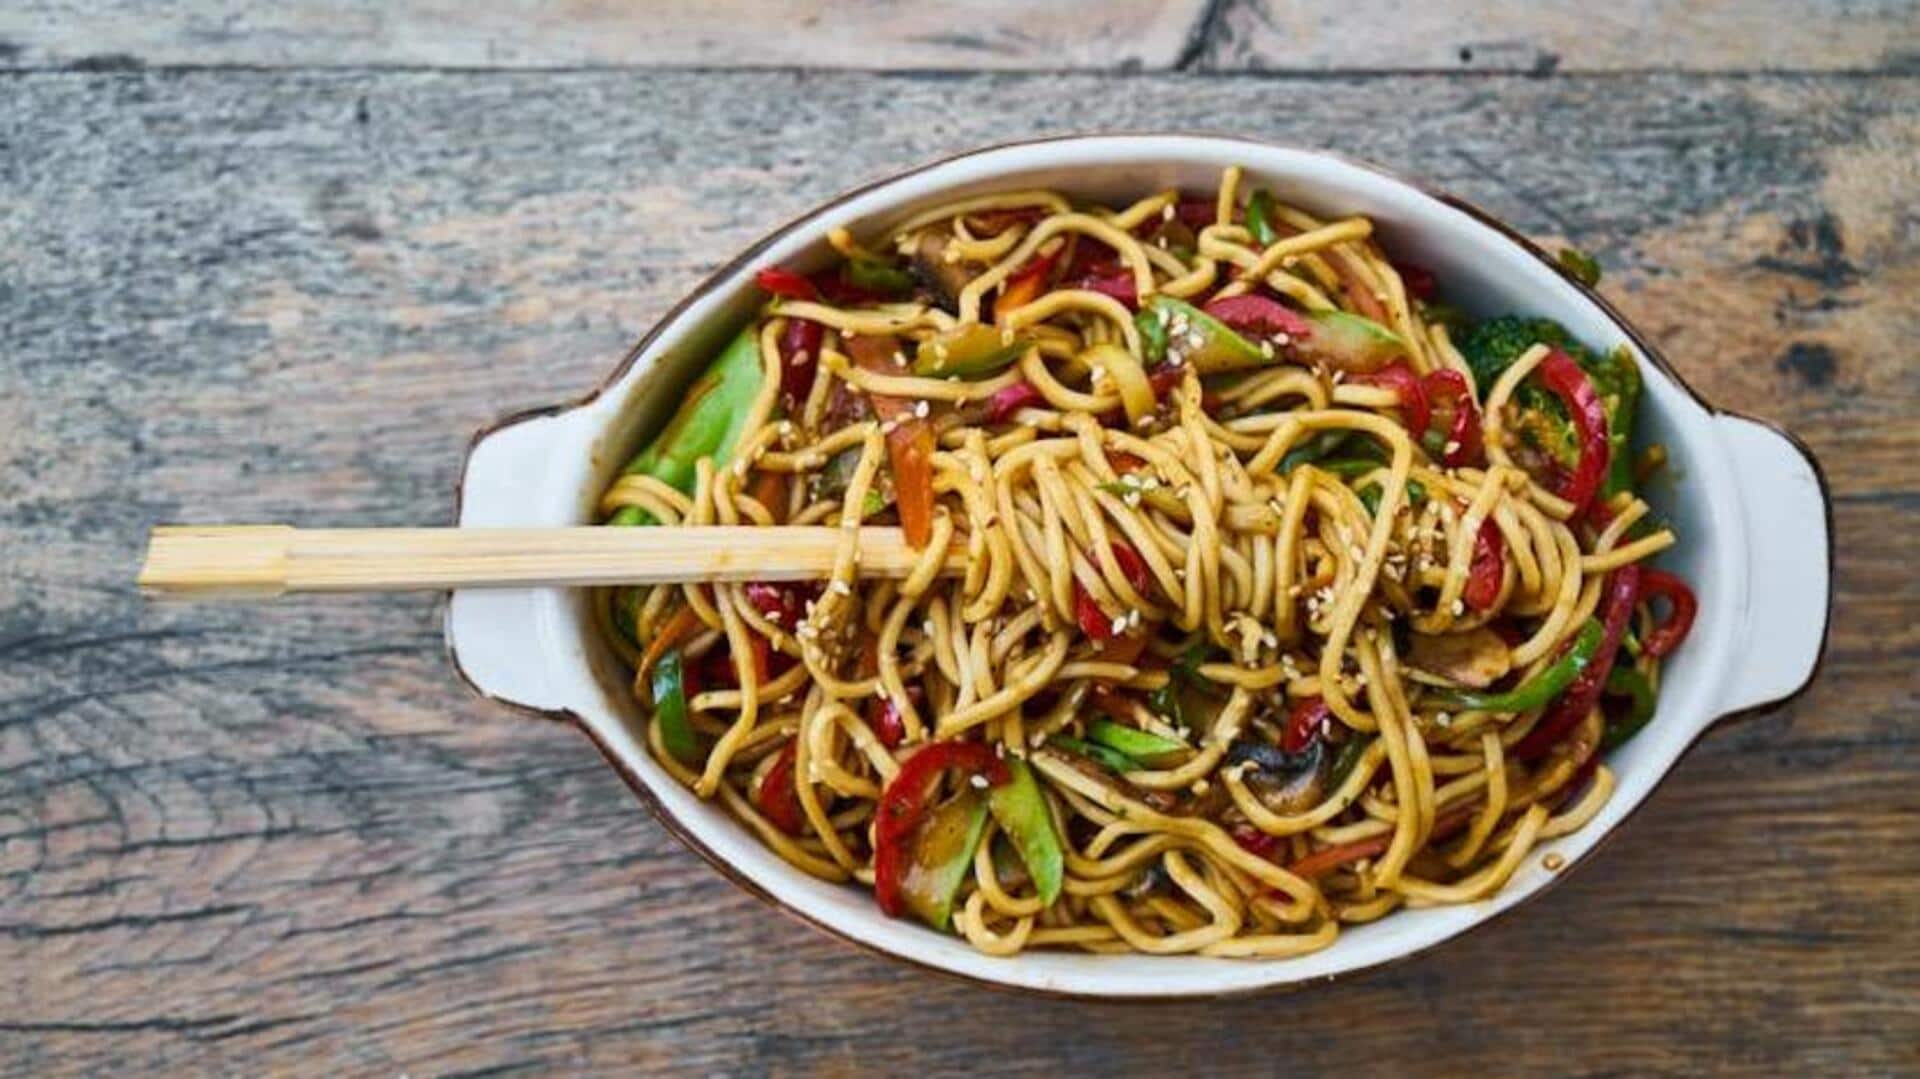 Check out this Indo-Chinese szechuan noodles recipe